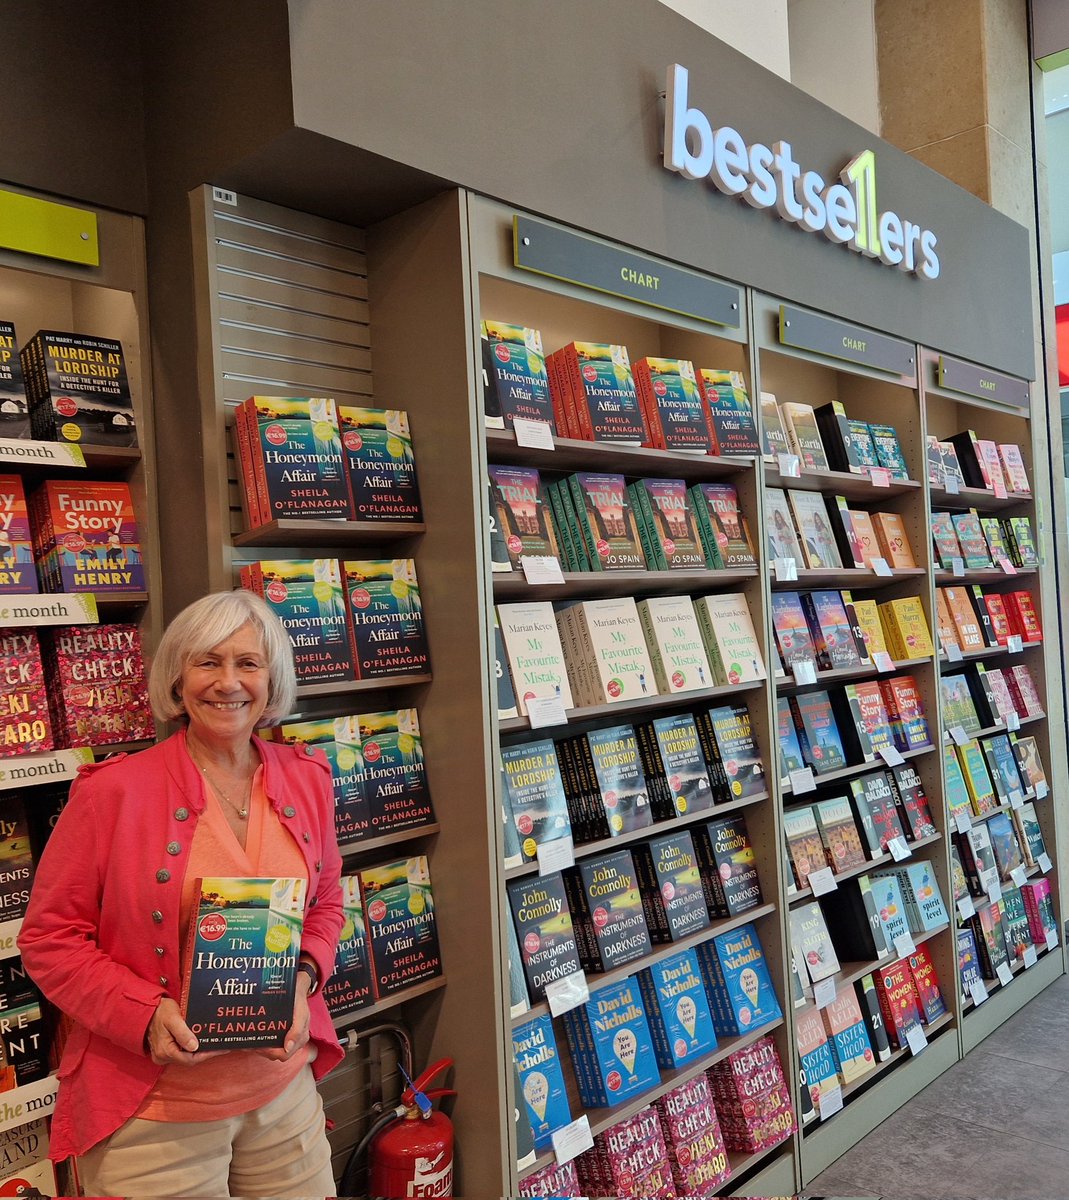 Thanks to the super booksellers in @easons @atLiffeyValley for the great displays of Sheila's #TheHoneymoonAffair  and the warm welcome.
@sheilaoflanagan 
@headlinepg